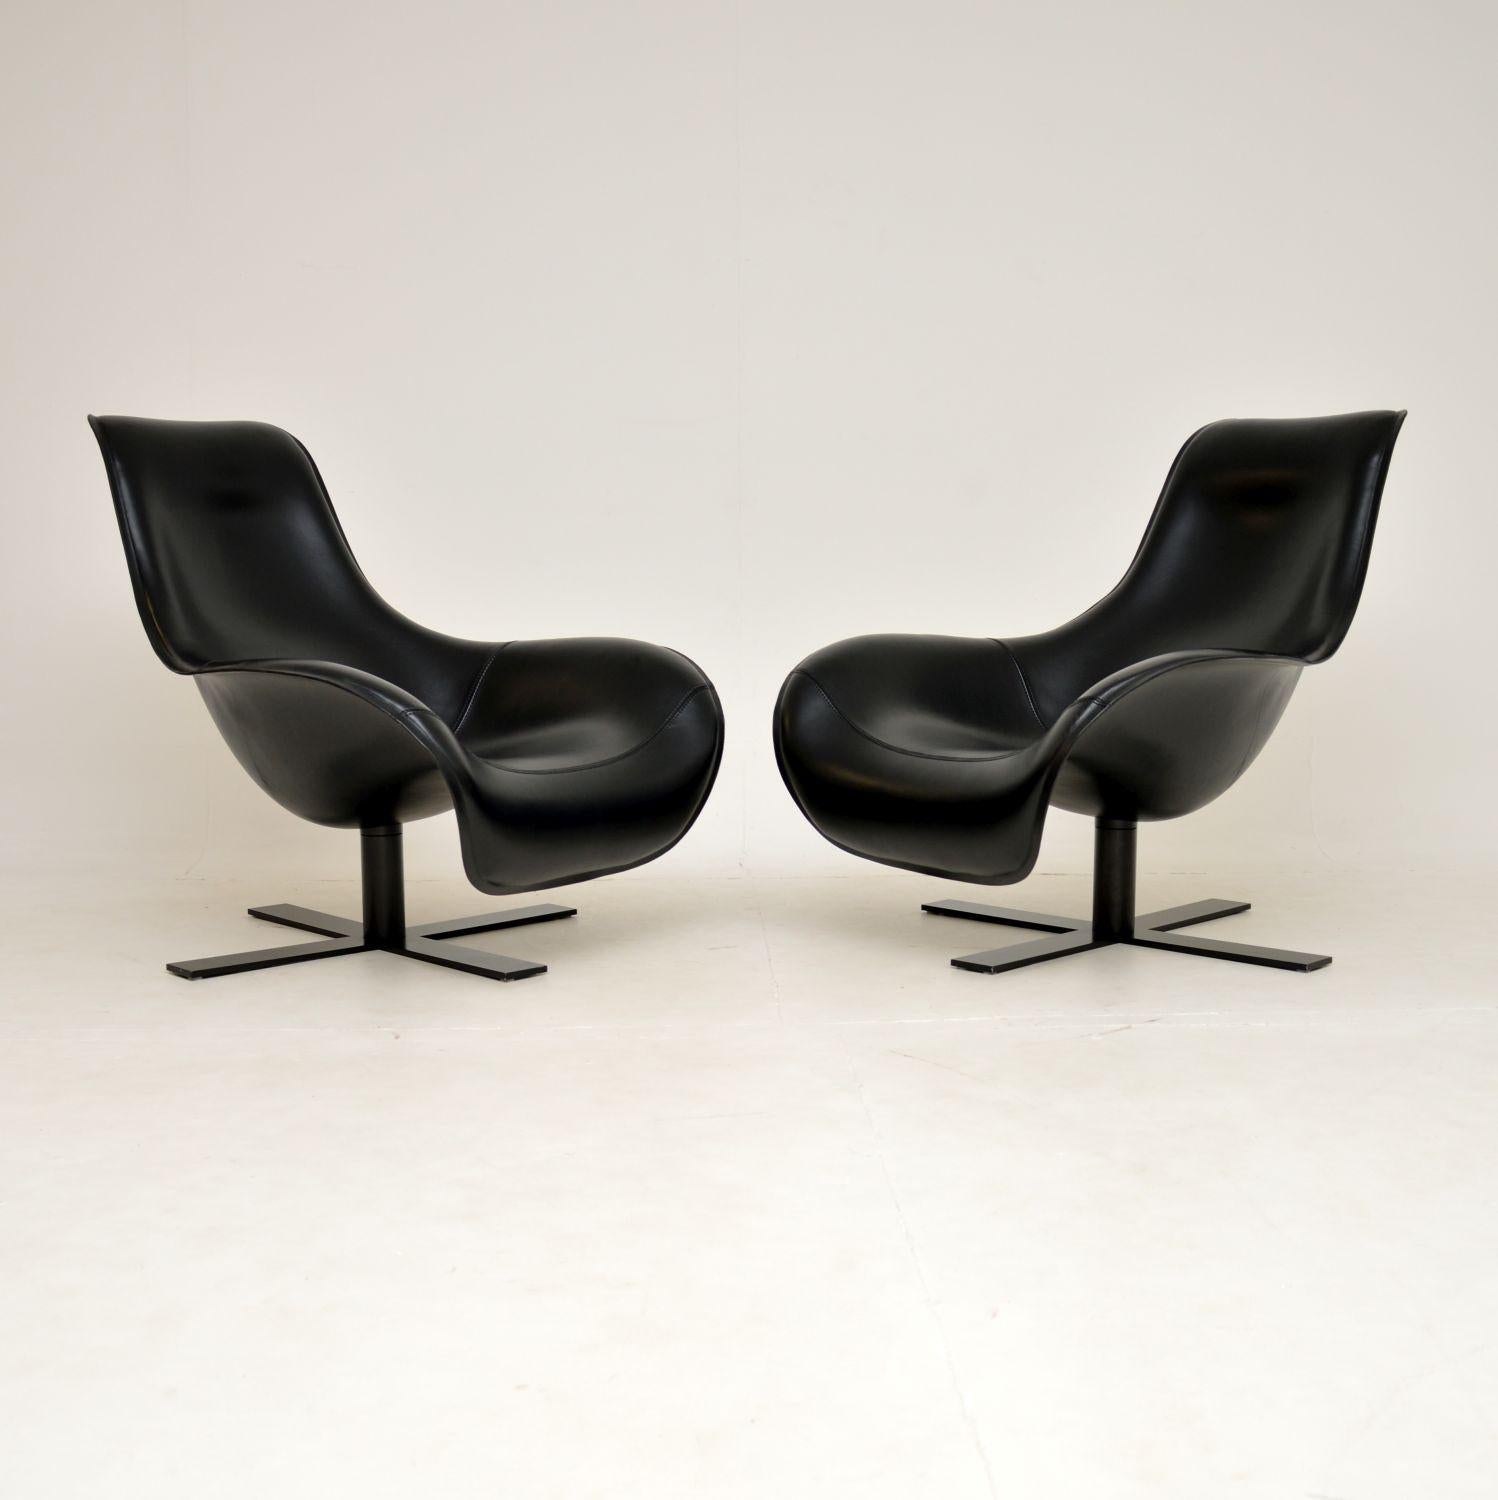 An outstanding pair of leather swivel armchairs by acclaimed designer Antonio Citterio for B&B Italia. They were designed in the early 21st century and this pair dates from 2006.

The quality is incredible, you will not see a more finely crafted